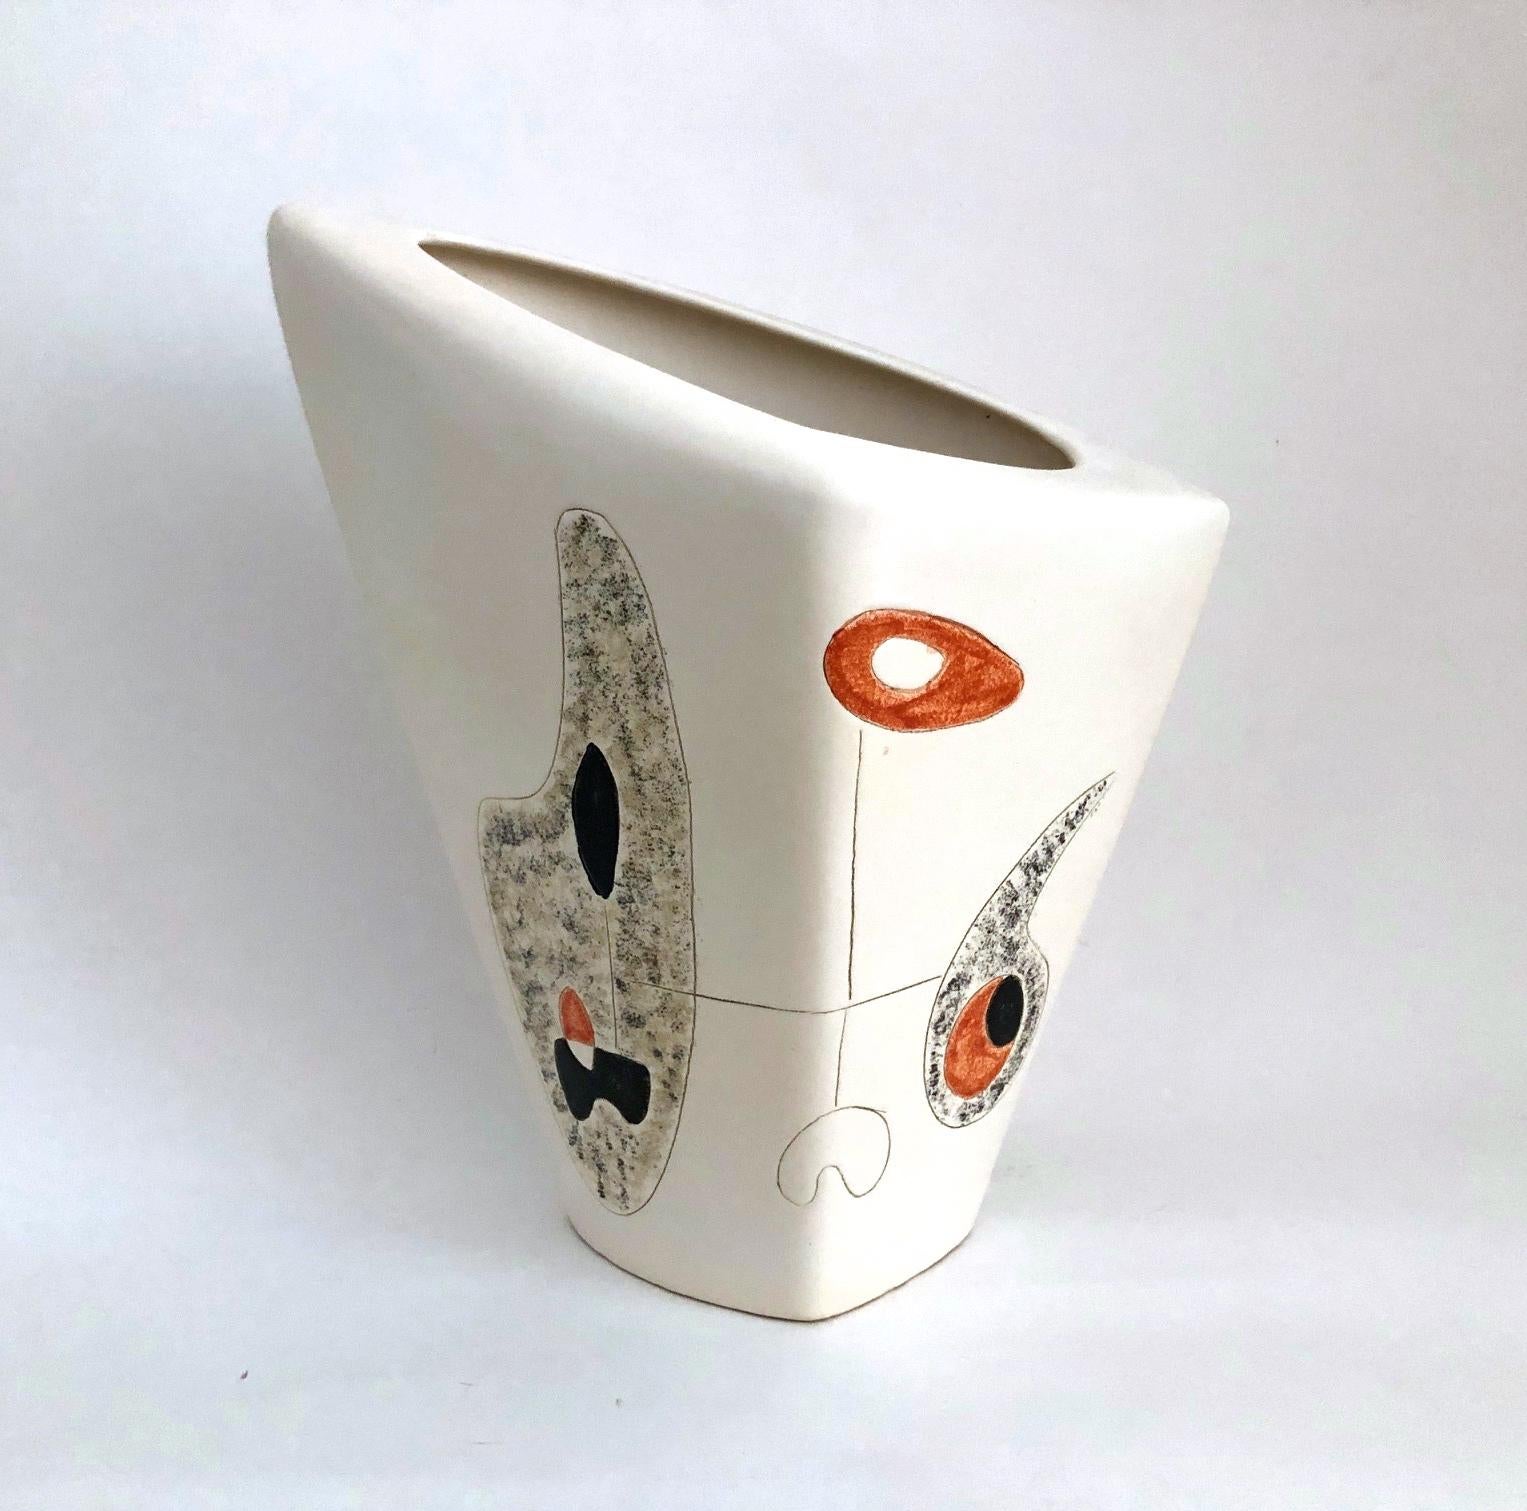 Earthenware vase glazed in white with abstract and geometric decoration engraved and over-glazed in shiny black and orange.
Hand-decorated piece, made in France, circa 1950-1960.
Typical Mid-Century Modern abstract and geometric design,